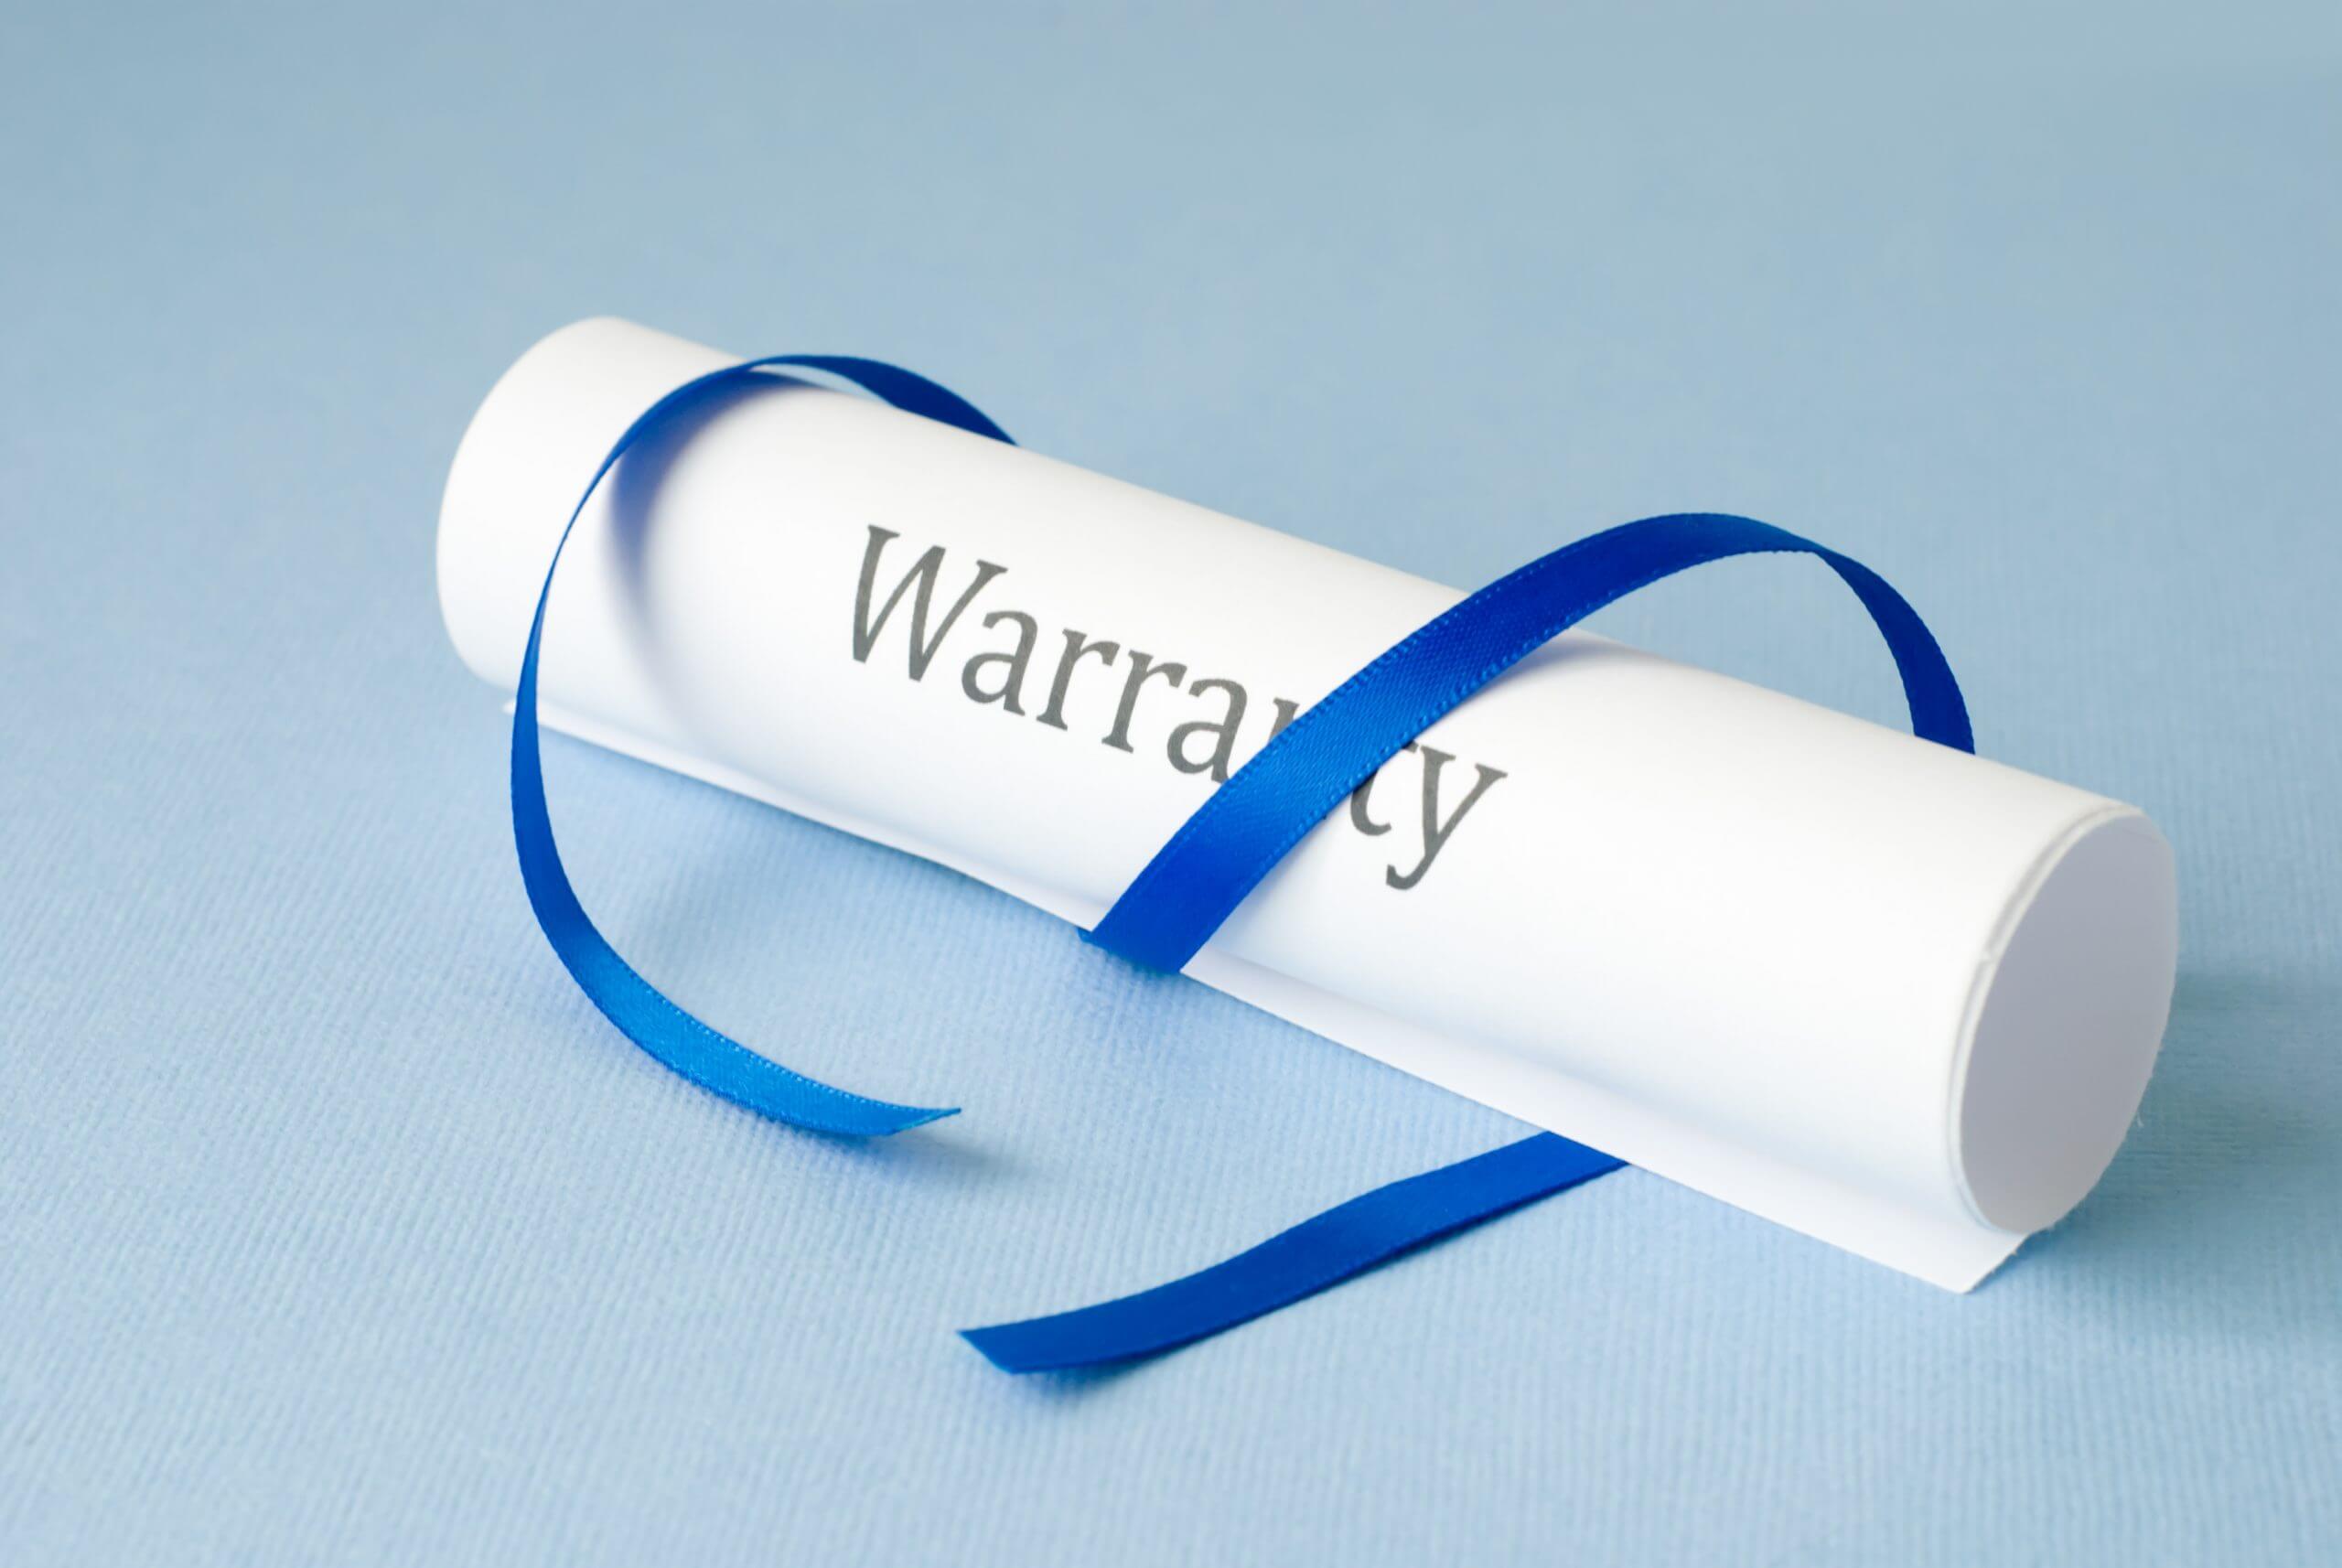 Word " Warranty" printed on a white paper